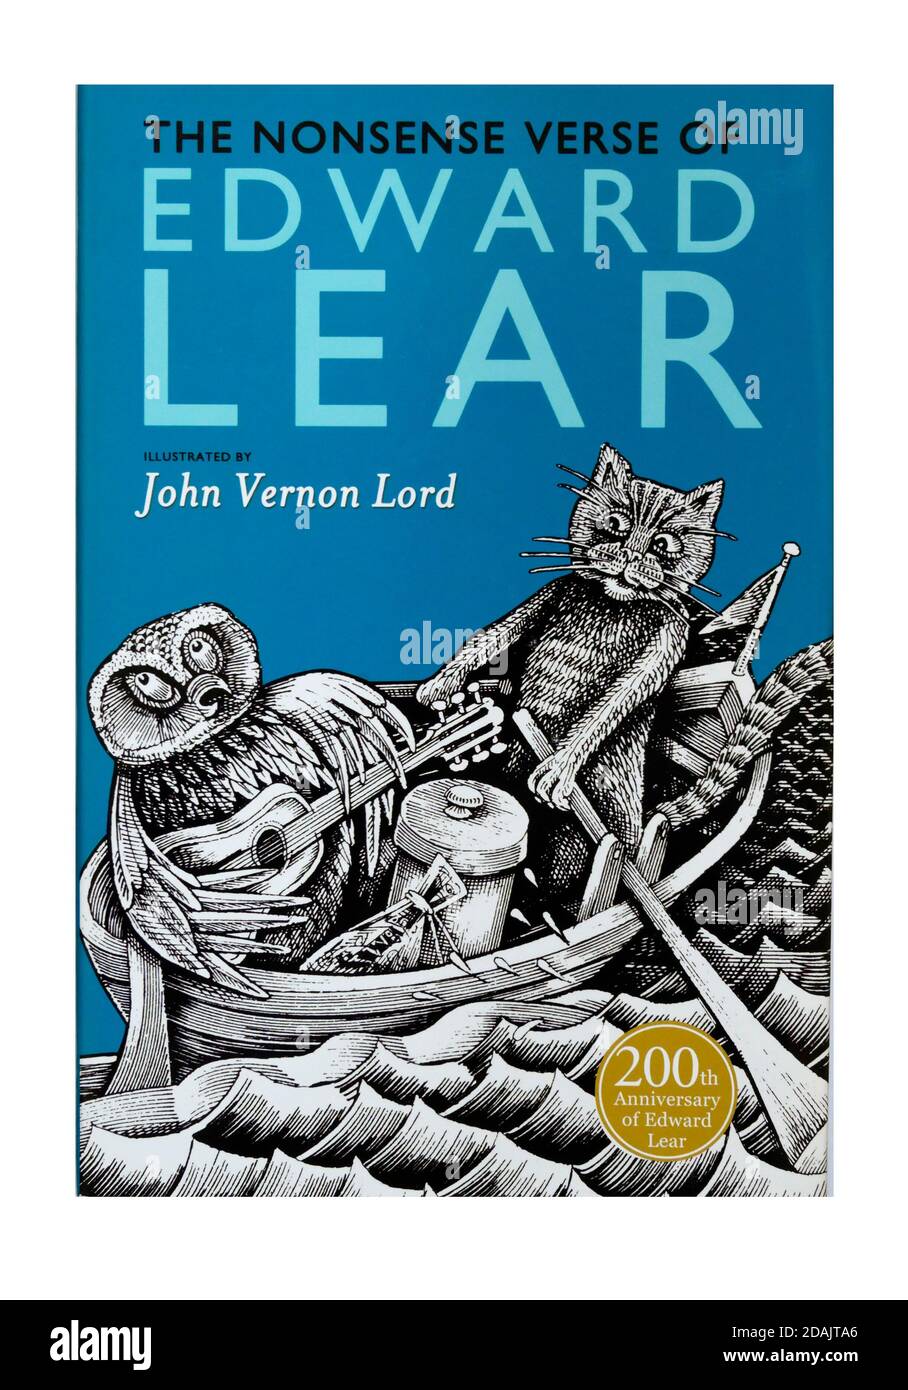 Book cover "The Nonsense Verse of Edward Lear", illustrated by John Vernon Lord. 200th.Anniversary of Edward Lear. Stock Photo